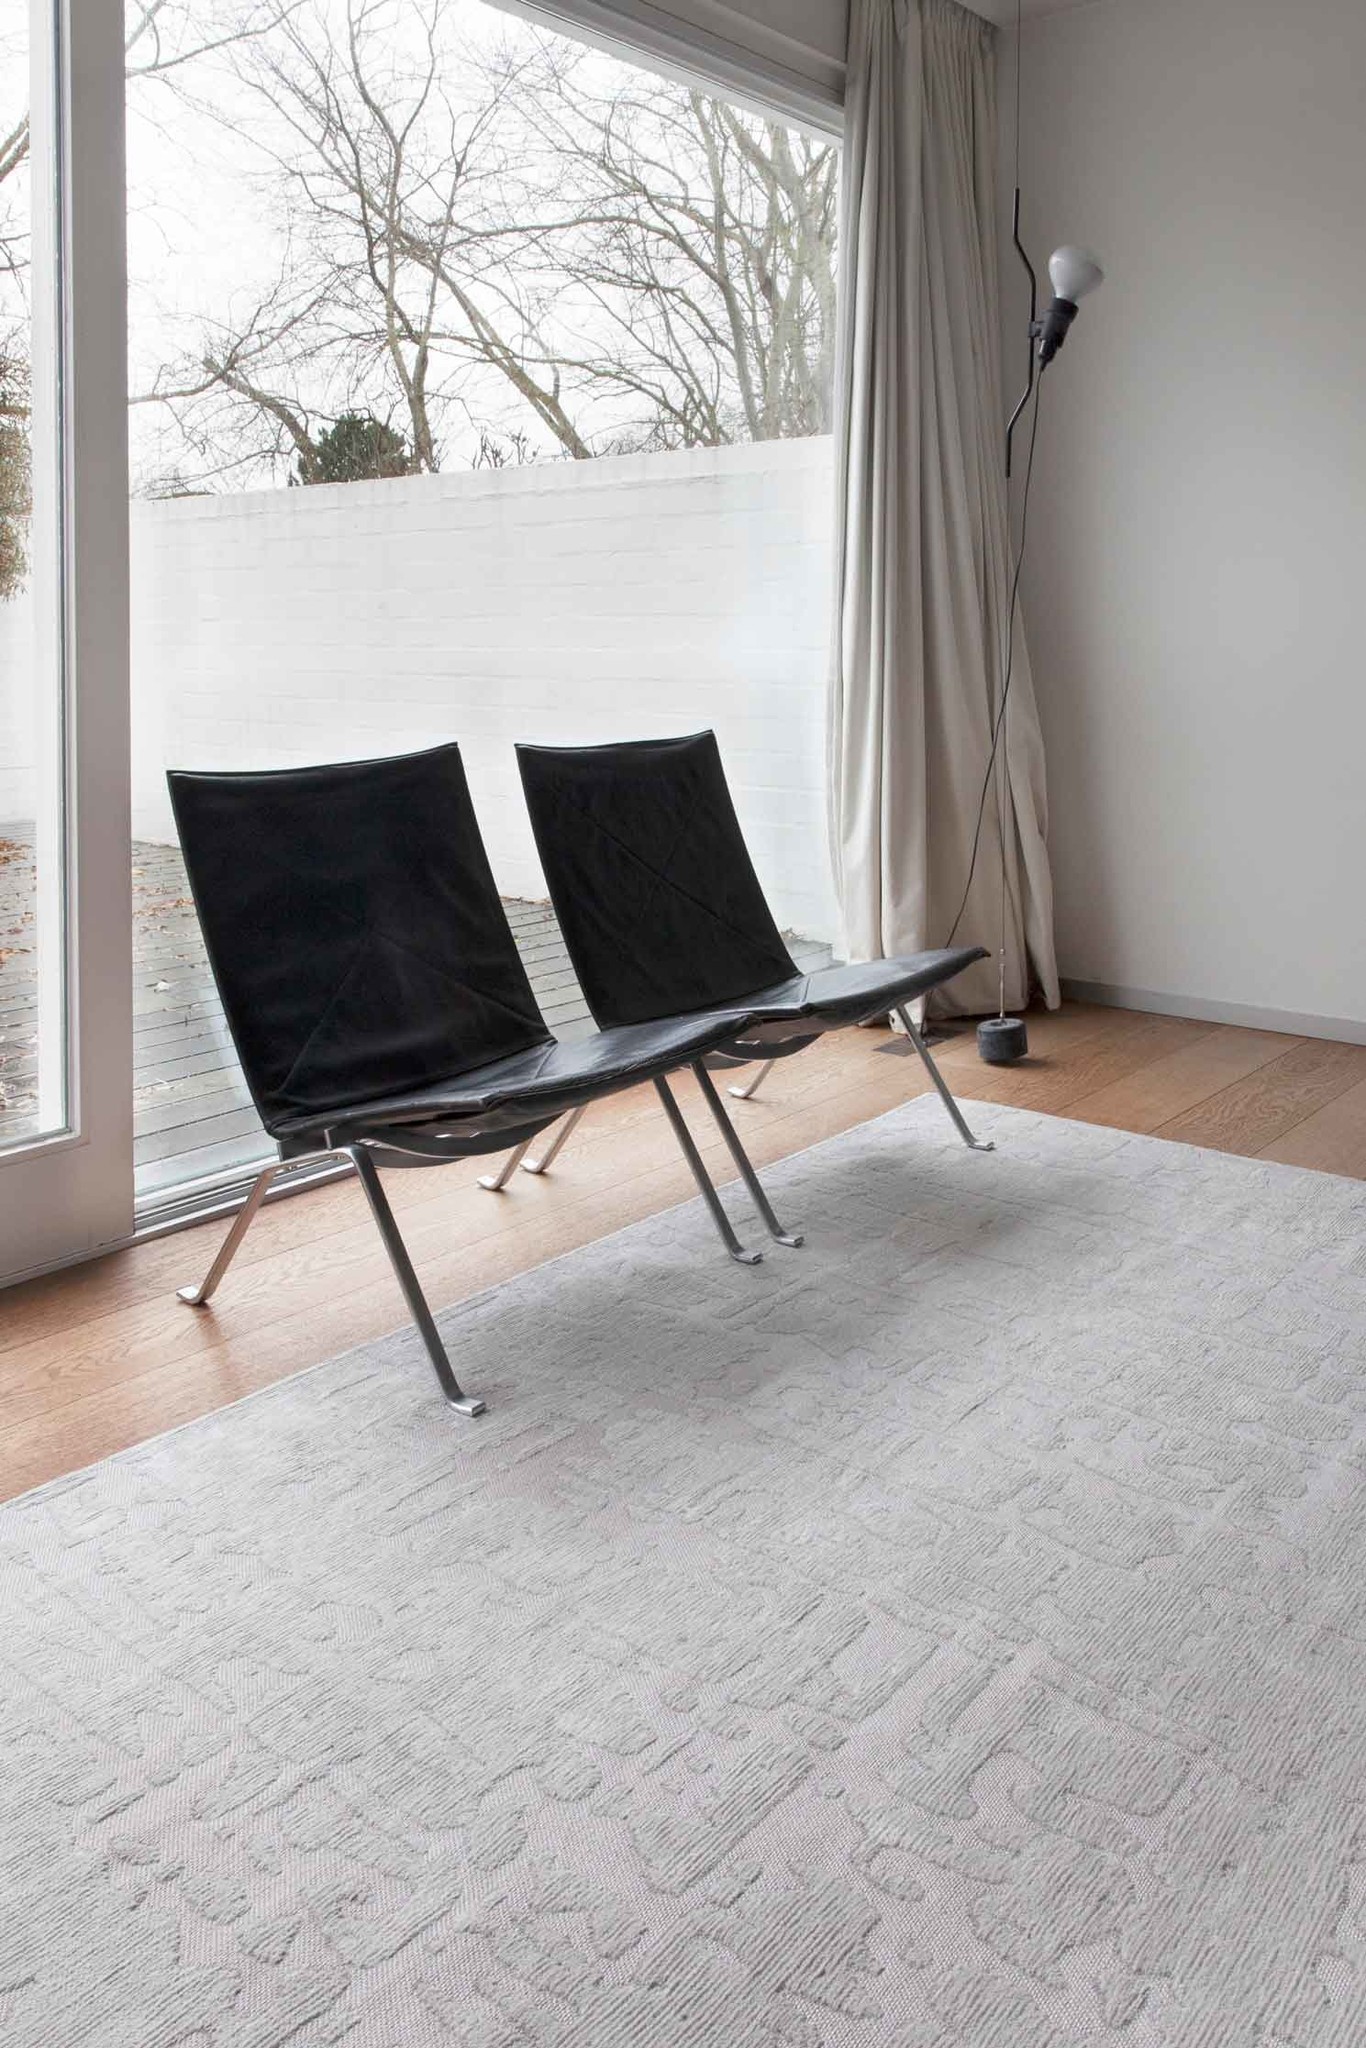 Abstract Silver Belgian Rug ☞ Size: 5' 7" x 8' (170 x 240 cm)